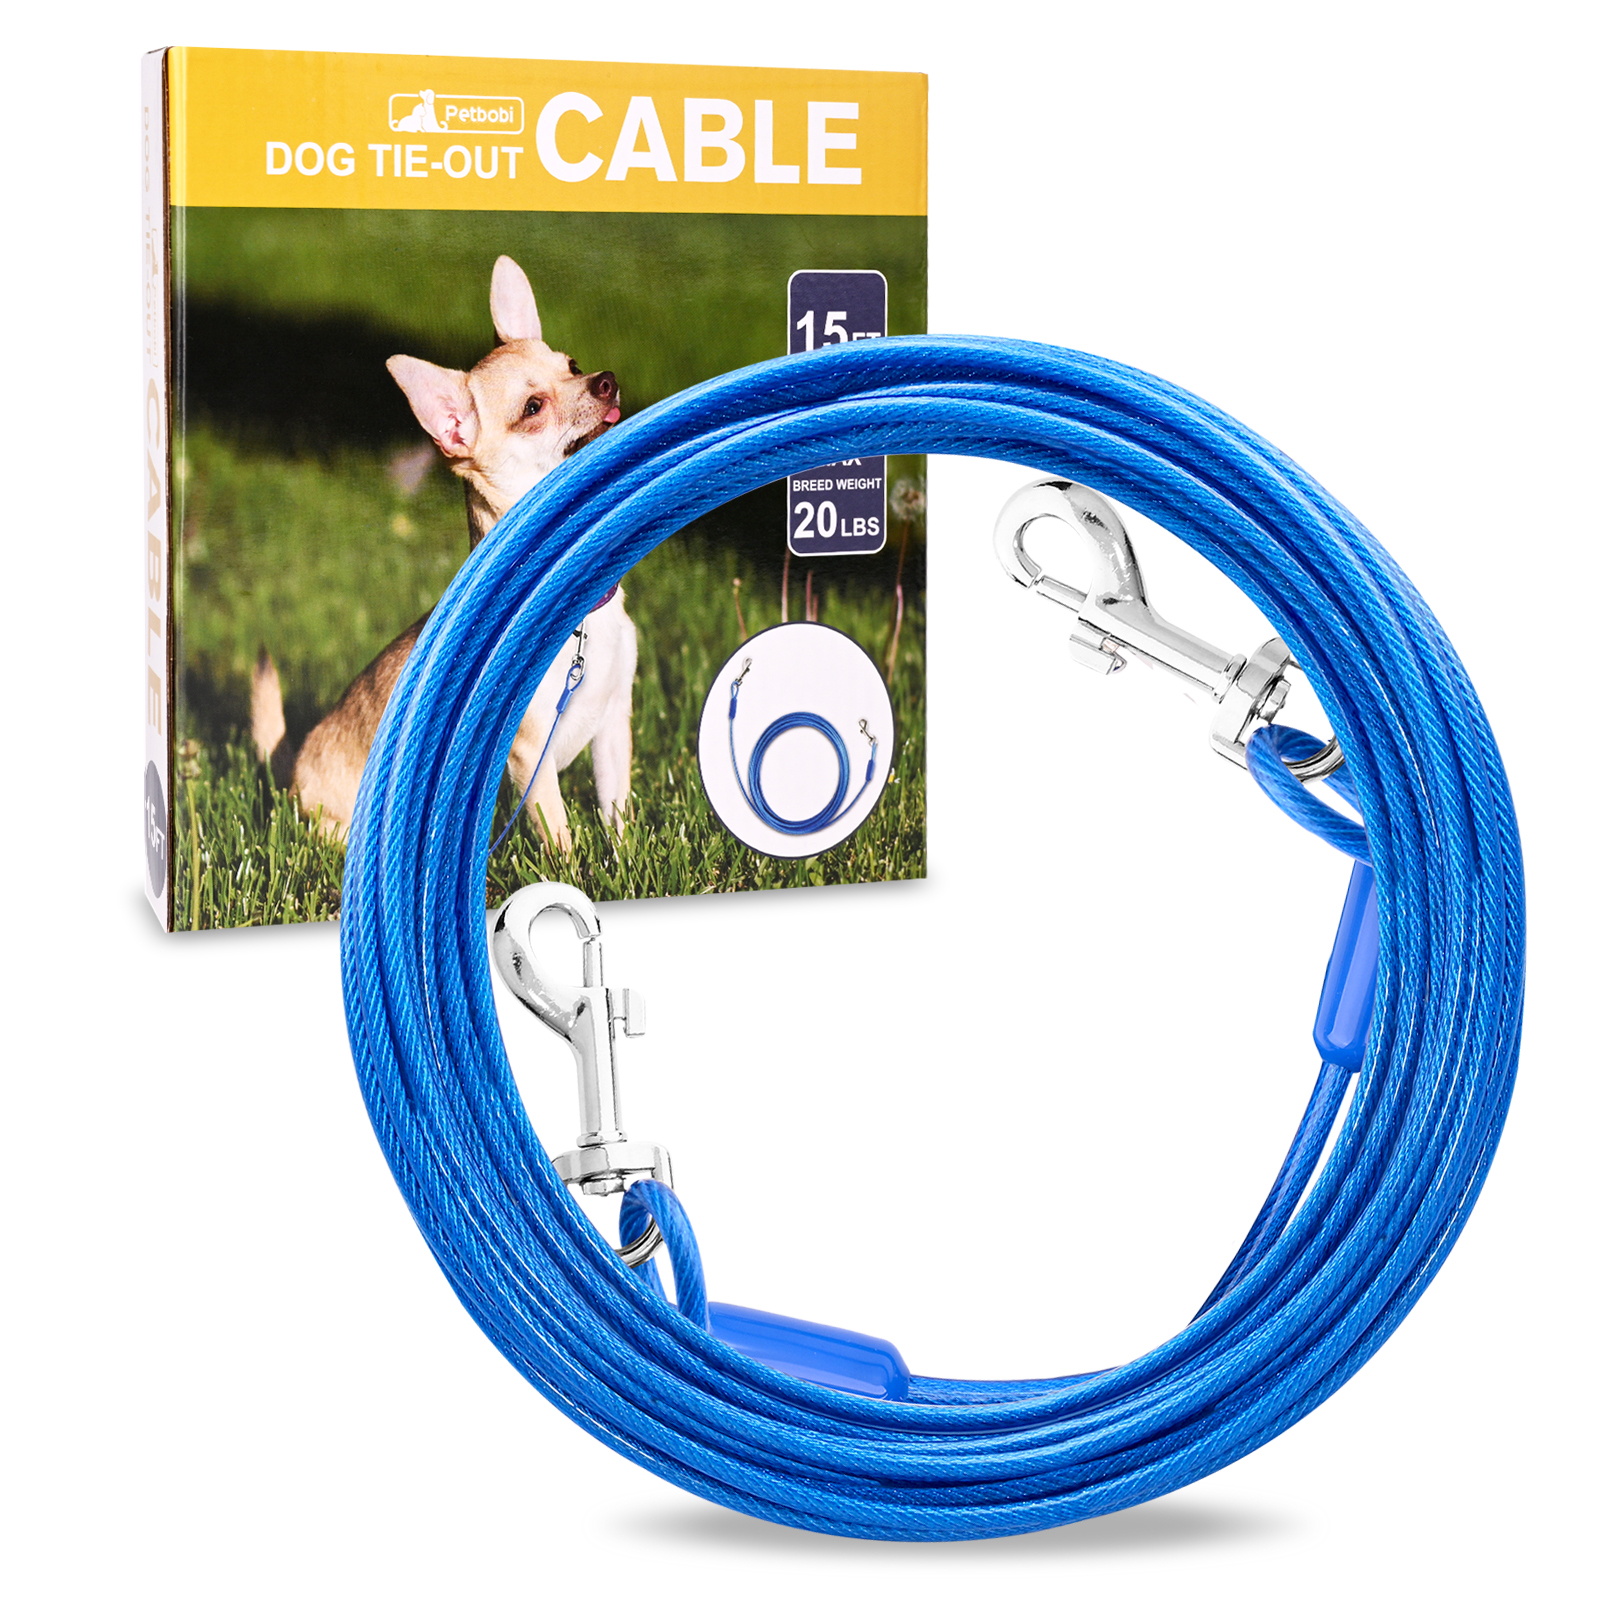 Dog Tie-Out Cable Set - 15ft/20lbs